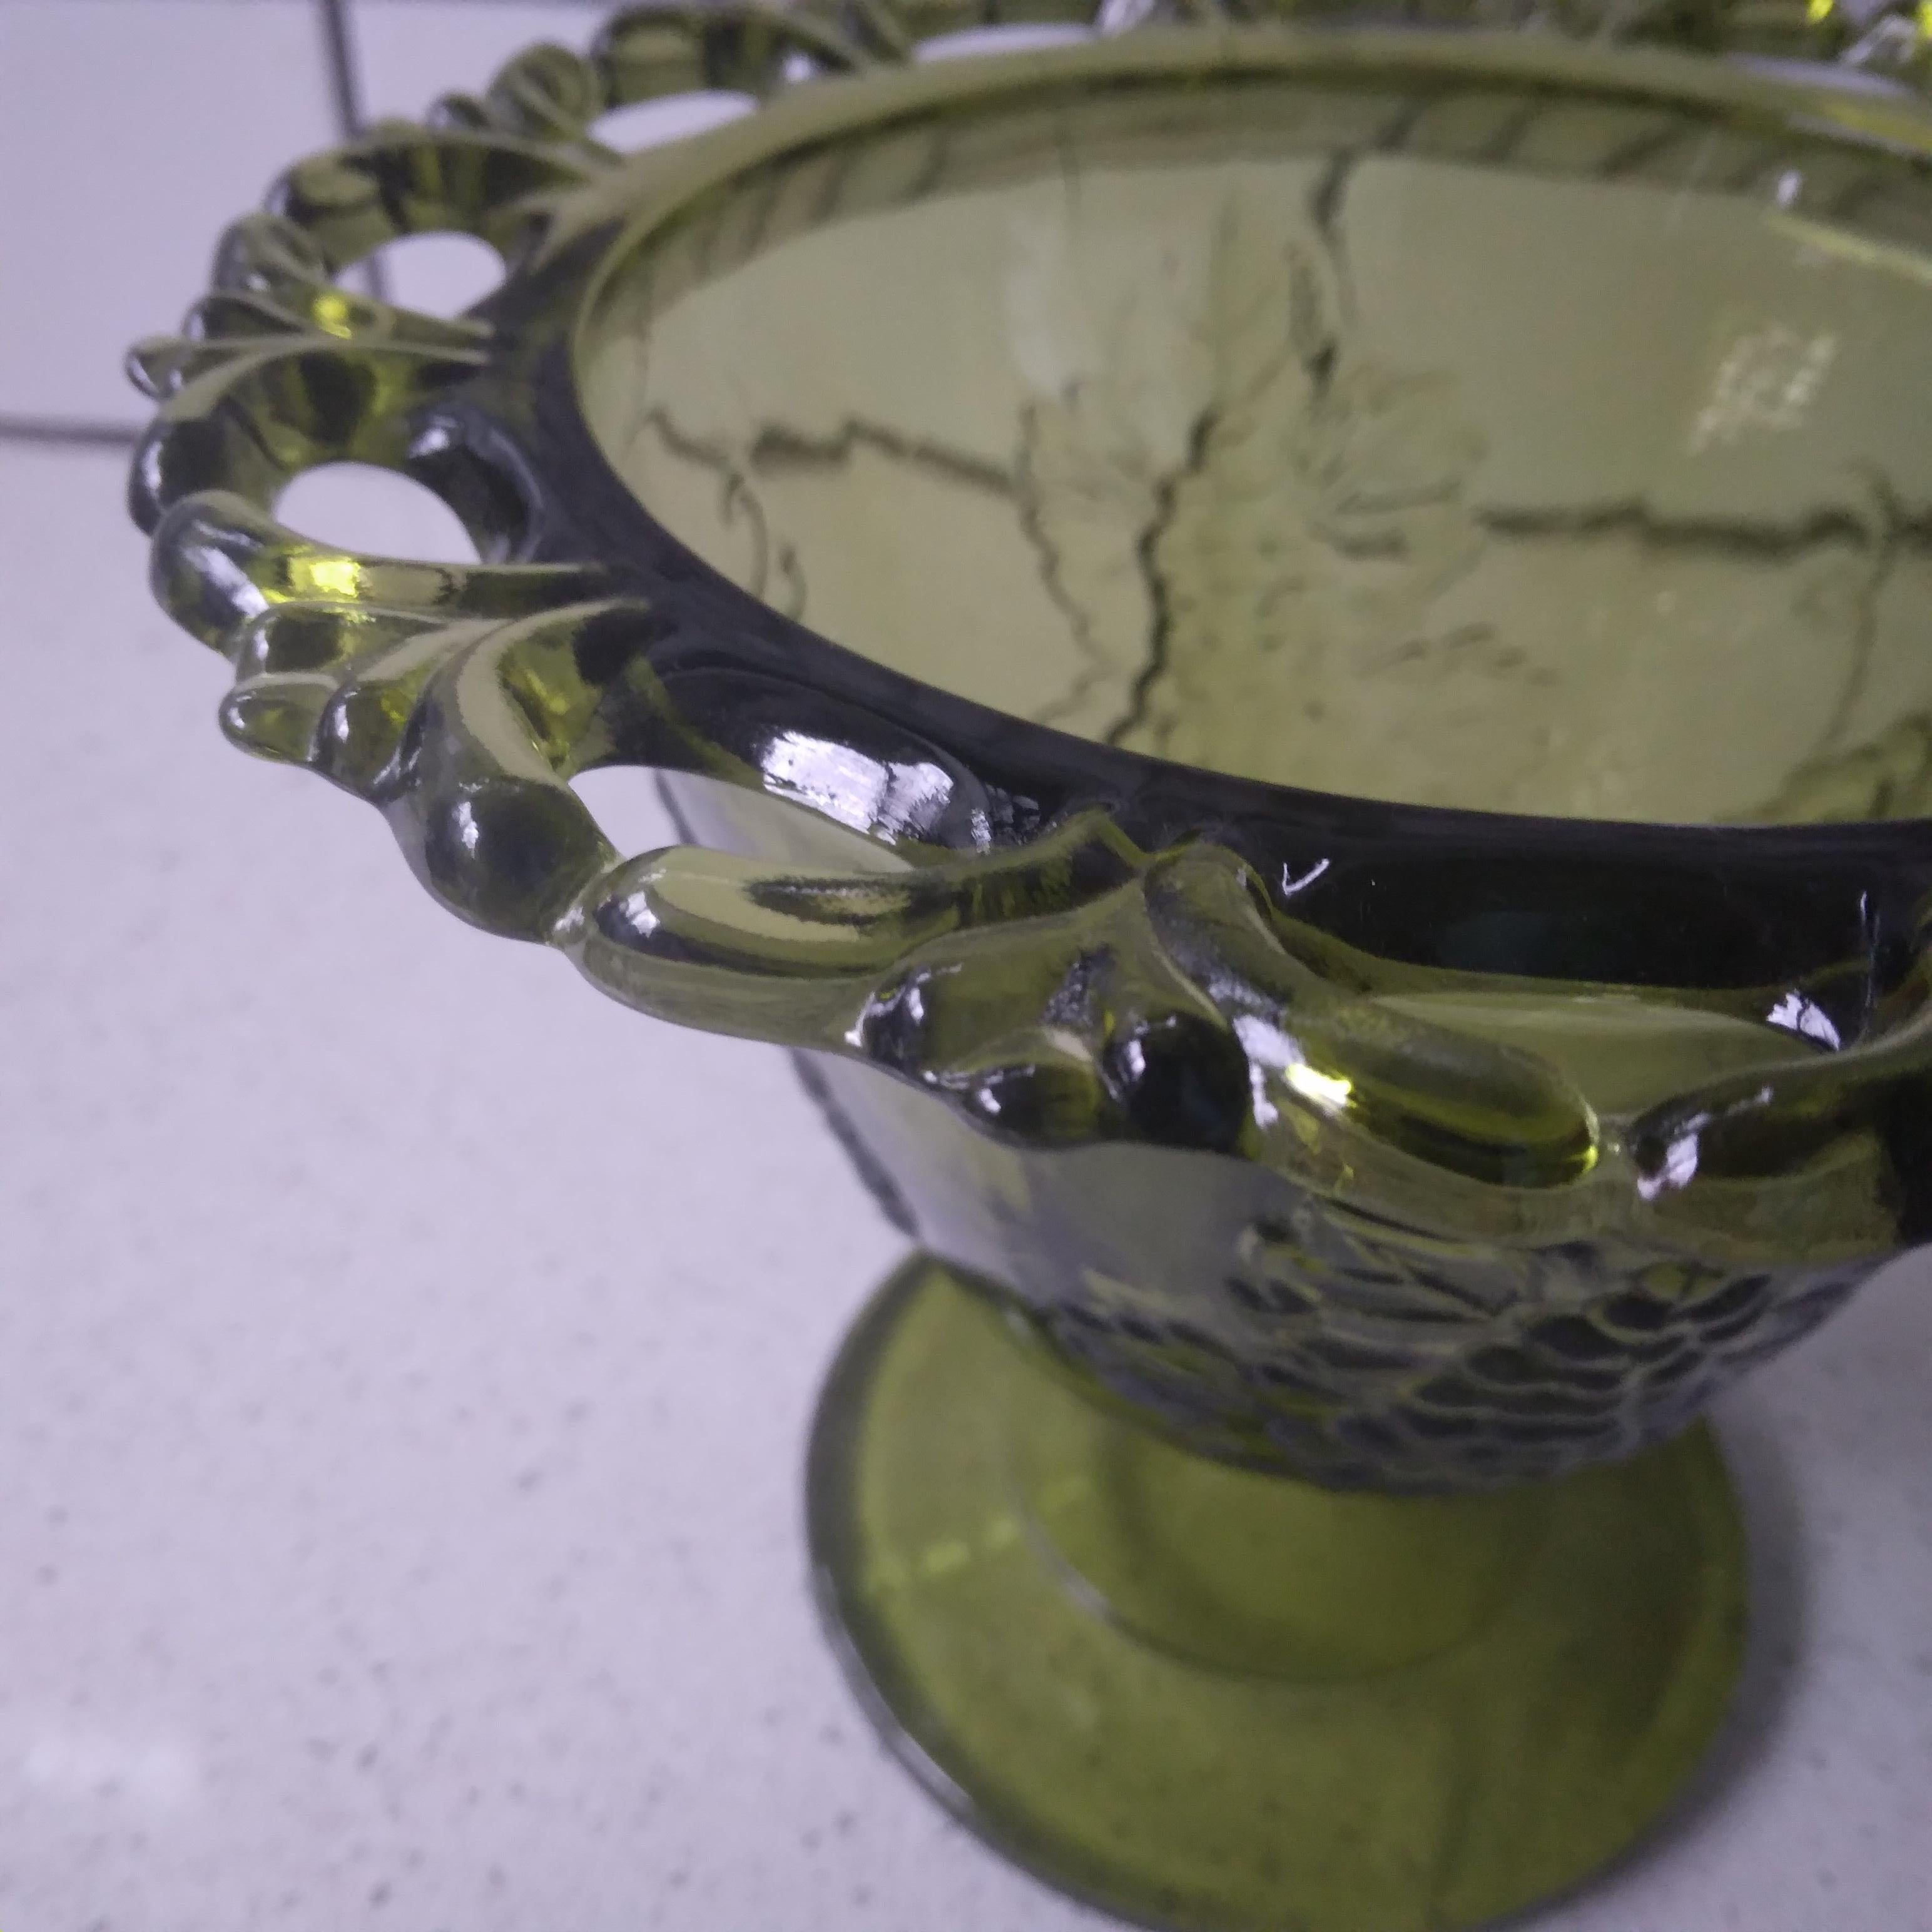 Sturdy and beautiful, we love the avocado green tones of this vintage bowl. 

This glass piece features an beautiful Harvest Grape design with an open lace top edge. The pedestal had a delighful grape motif for the stem. The classic 1960-70's green